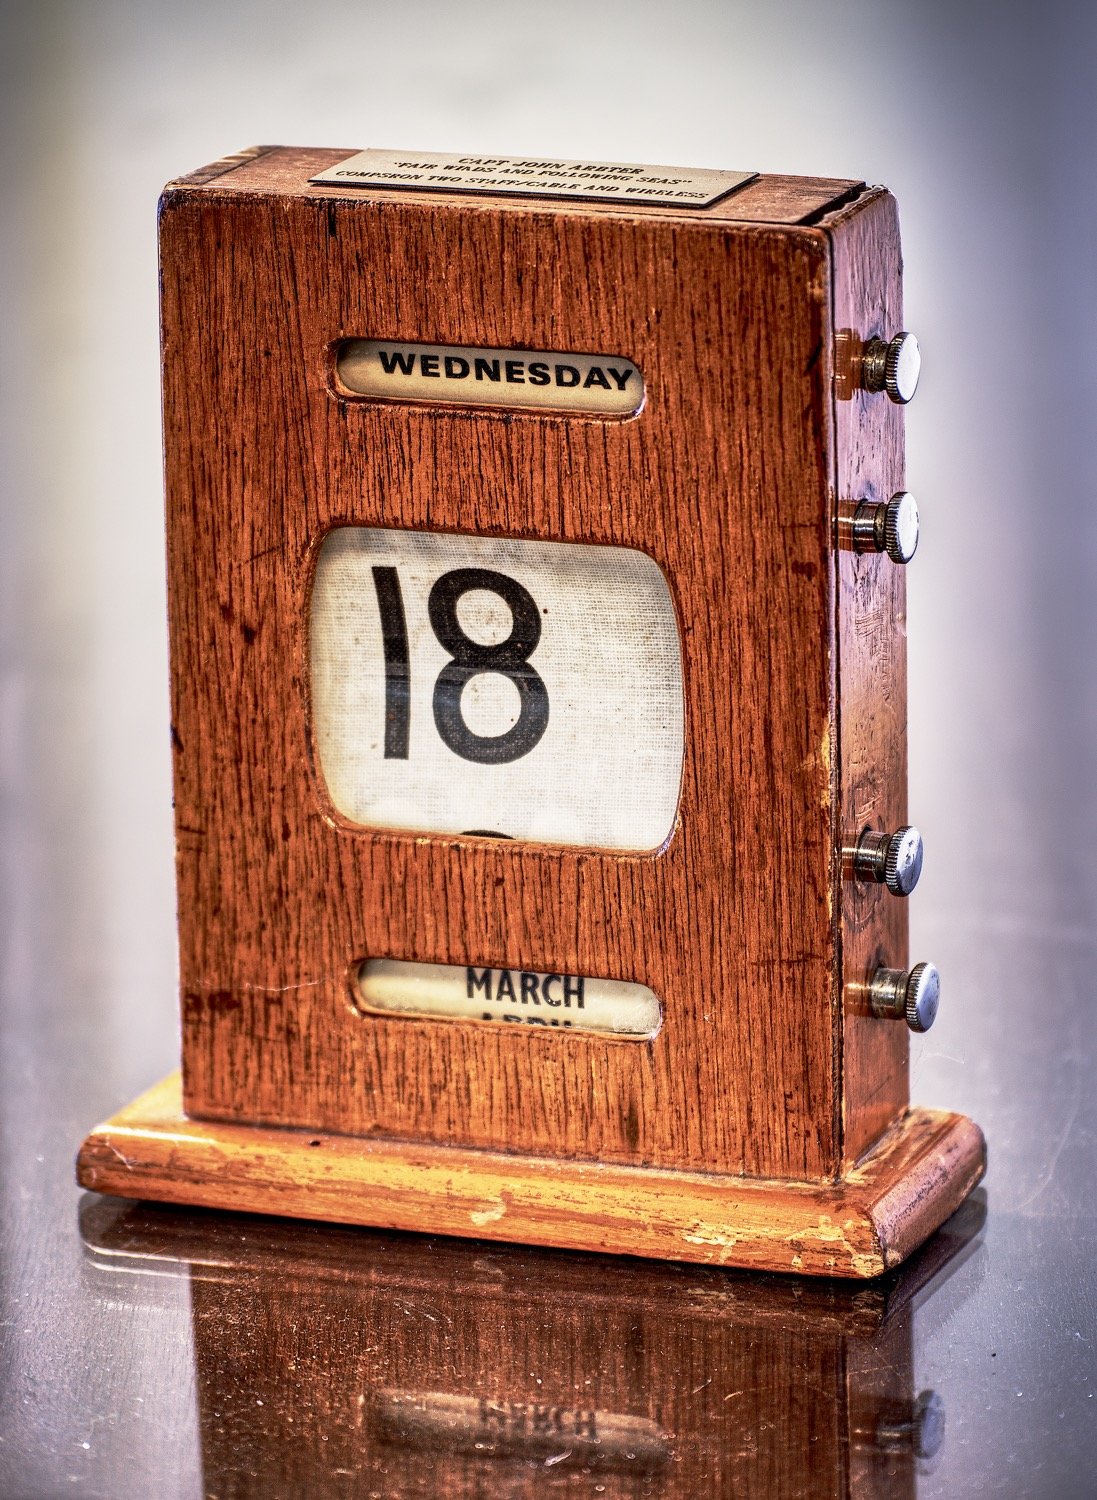 A manual perpetual calendar remains stuck on March 18, signifying when the COVID-19 shut down took hold.